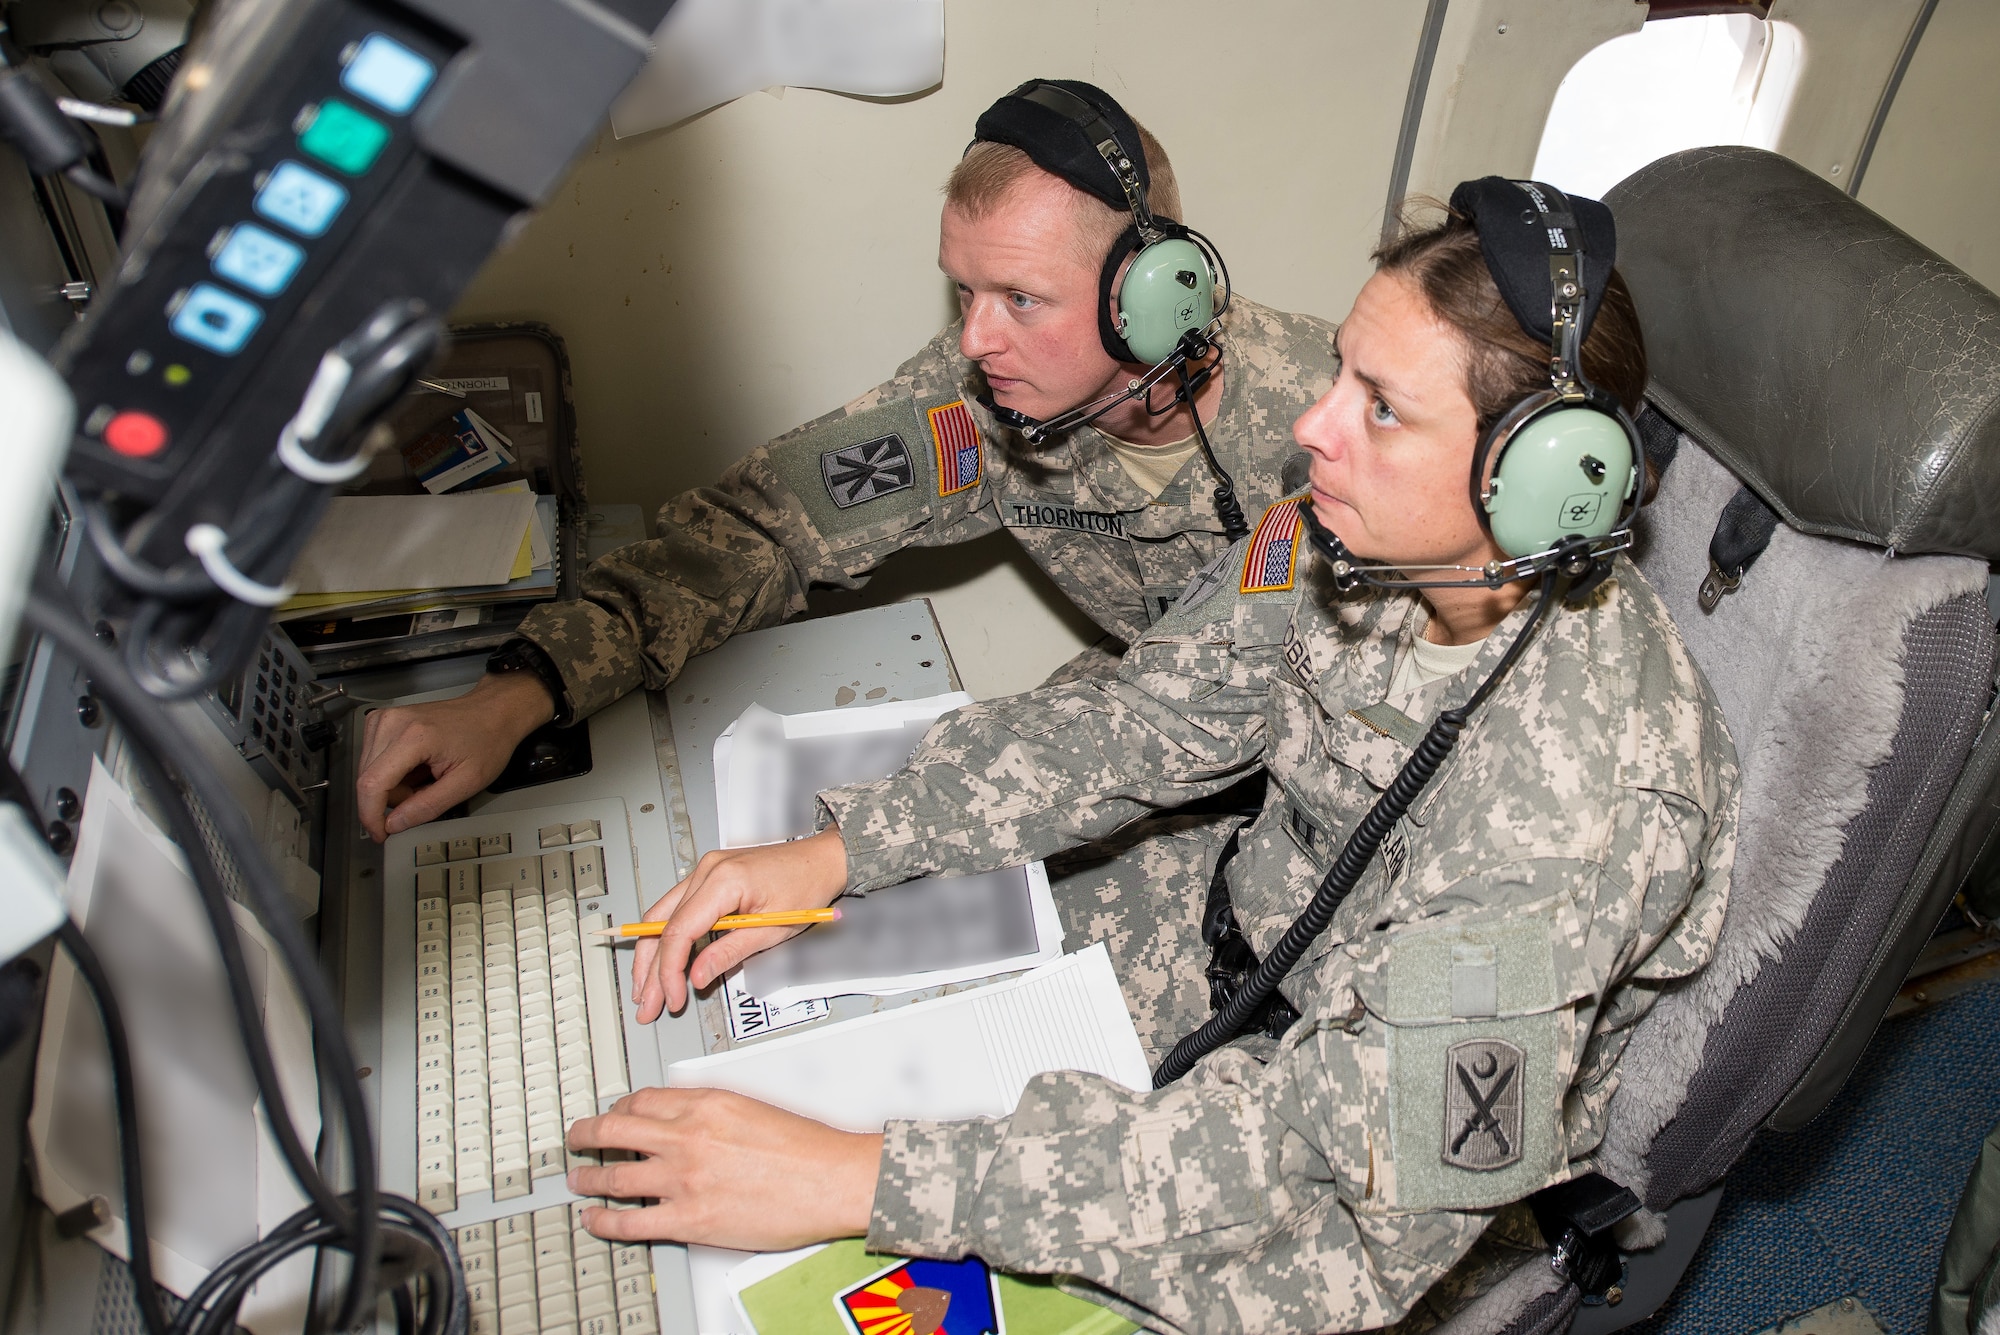 U.S Army Capt. Christopher Thornton, left, a deputy mission crew commander, 138th Military Intelligence Company, provides Capt. Michelle Roberts, deputy intelligence officer from the 118th Infantry Battalion, South Carolina National Guard, hands-on training at his operator work station aboard the E-8C Joint STARS aircraft during exercise Operation Carolina Thunder, Robins Air Force Base, Ga., Nov. 15, 2014.  During the exercise, Airmen and Soldiers from the 116th Air Control Wing and the 138th Military Intelligence Company provided targeting data and intelligence to F-16 Fighting Falcons, AH-64D Apache Attack Helicopters and ground forces using the one-of-a-kind battle management command and control, intelligence, surveillance and reconnaissance capabilities of the E-8C Joint STARS. The exercise was a multi-state, multi-component, collective training exercise conducted during the South Carolina drill weekend. It involved more than 650 participants from South Carolina, North Carolina, Georgia and Tennessee National Guard units.  (Portion of photo blurred for security purposes) (U.S. Air National Guard photo by Tech. Sgt. Regina Young/released)